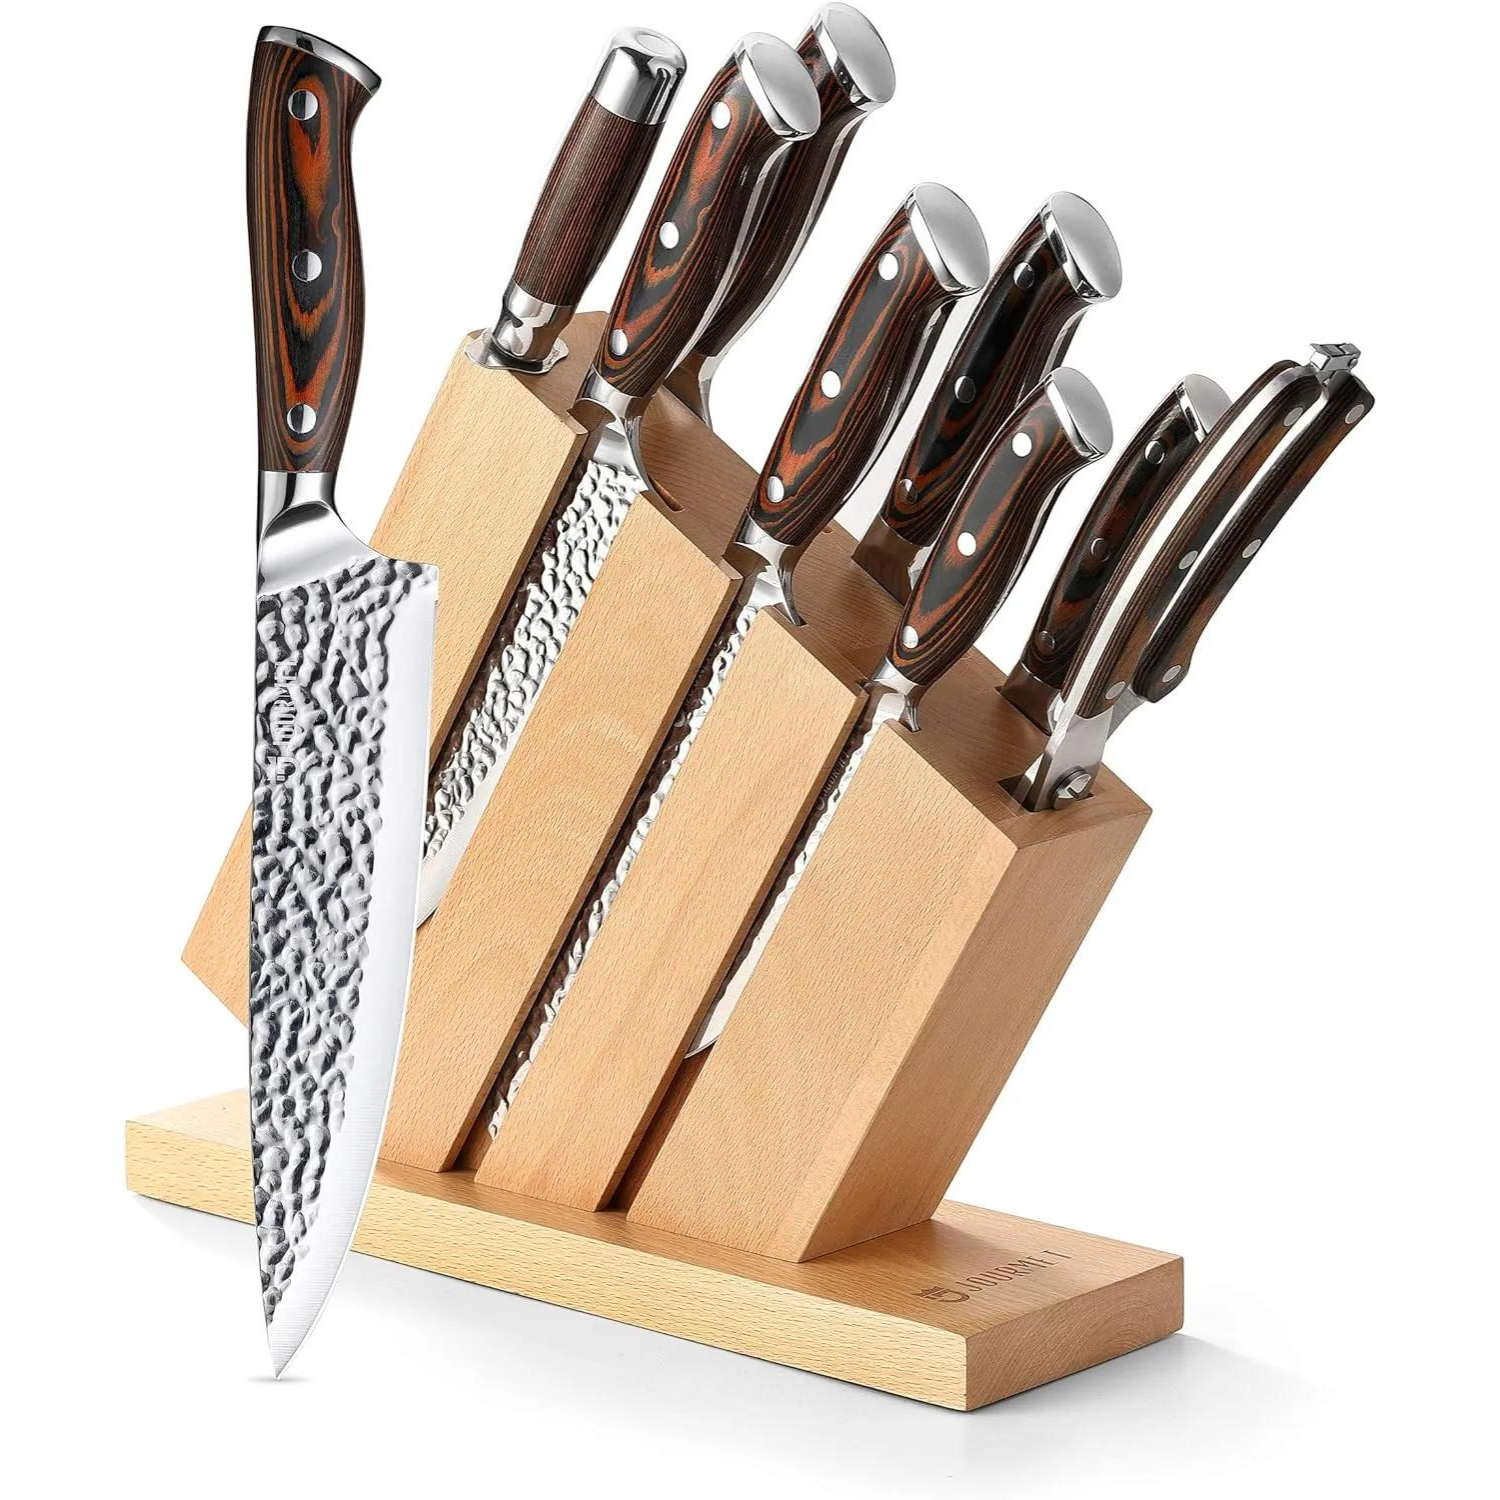 Joumet 9-Piece Kitchen Knife Set with Block on white background, showcasing the elegance and design of each knife